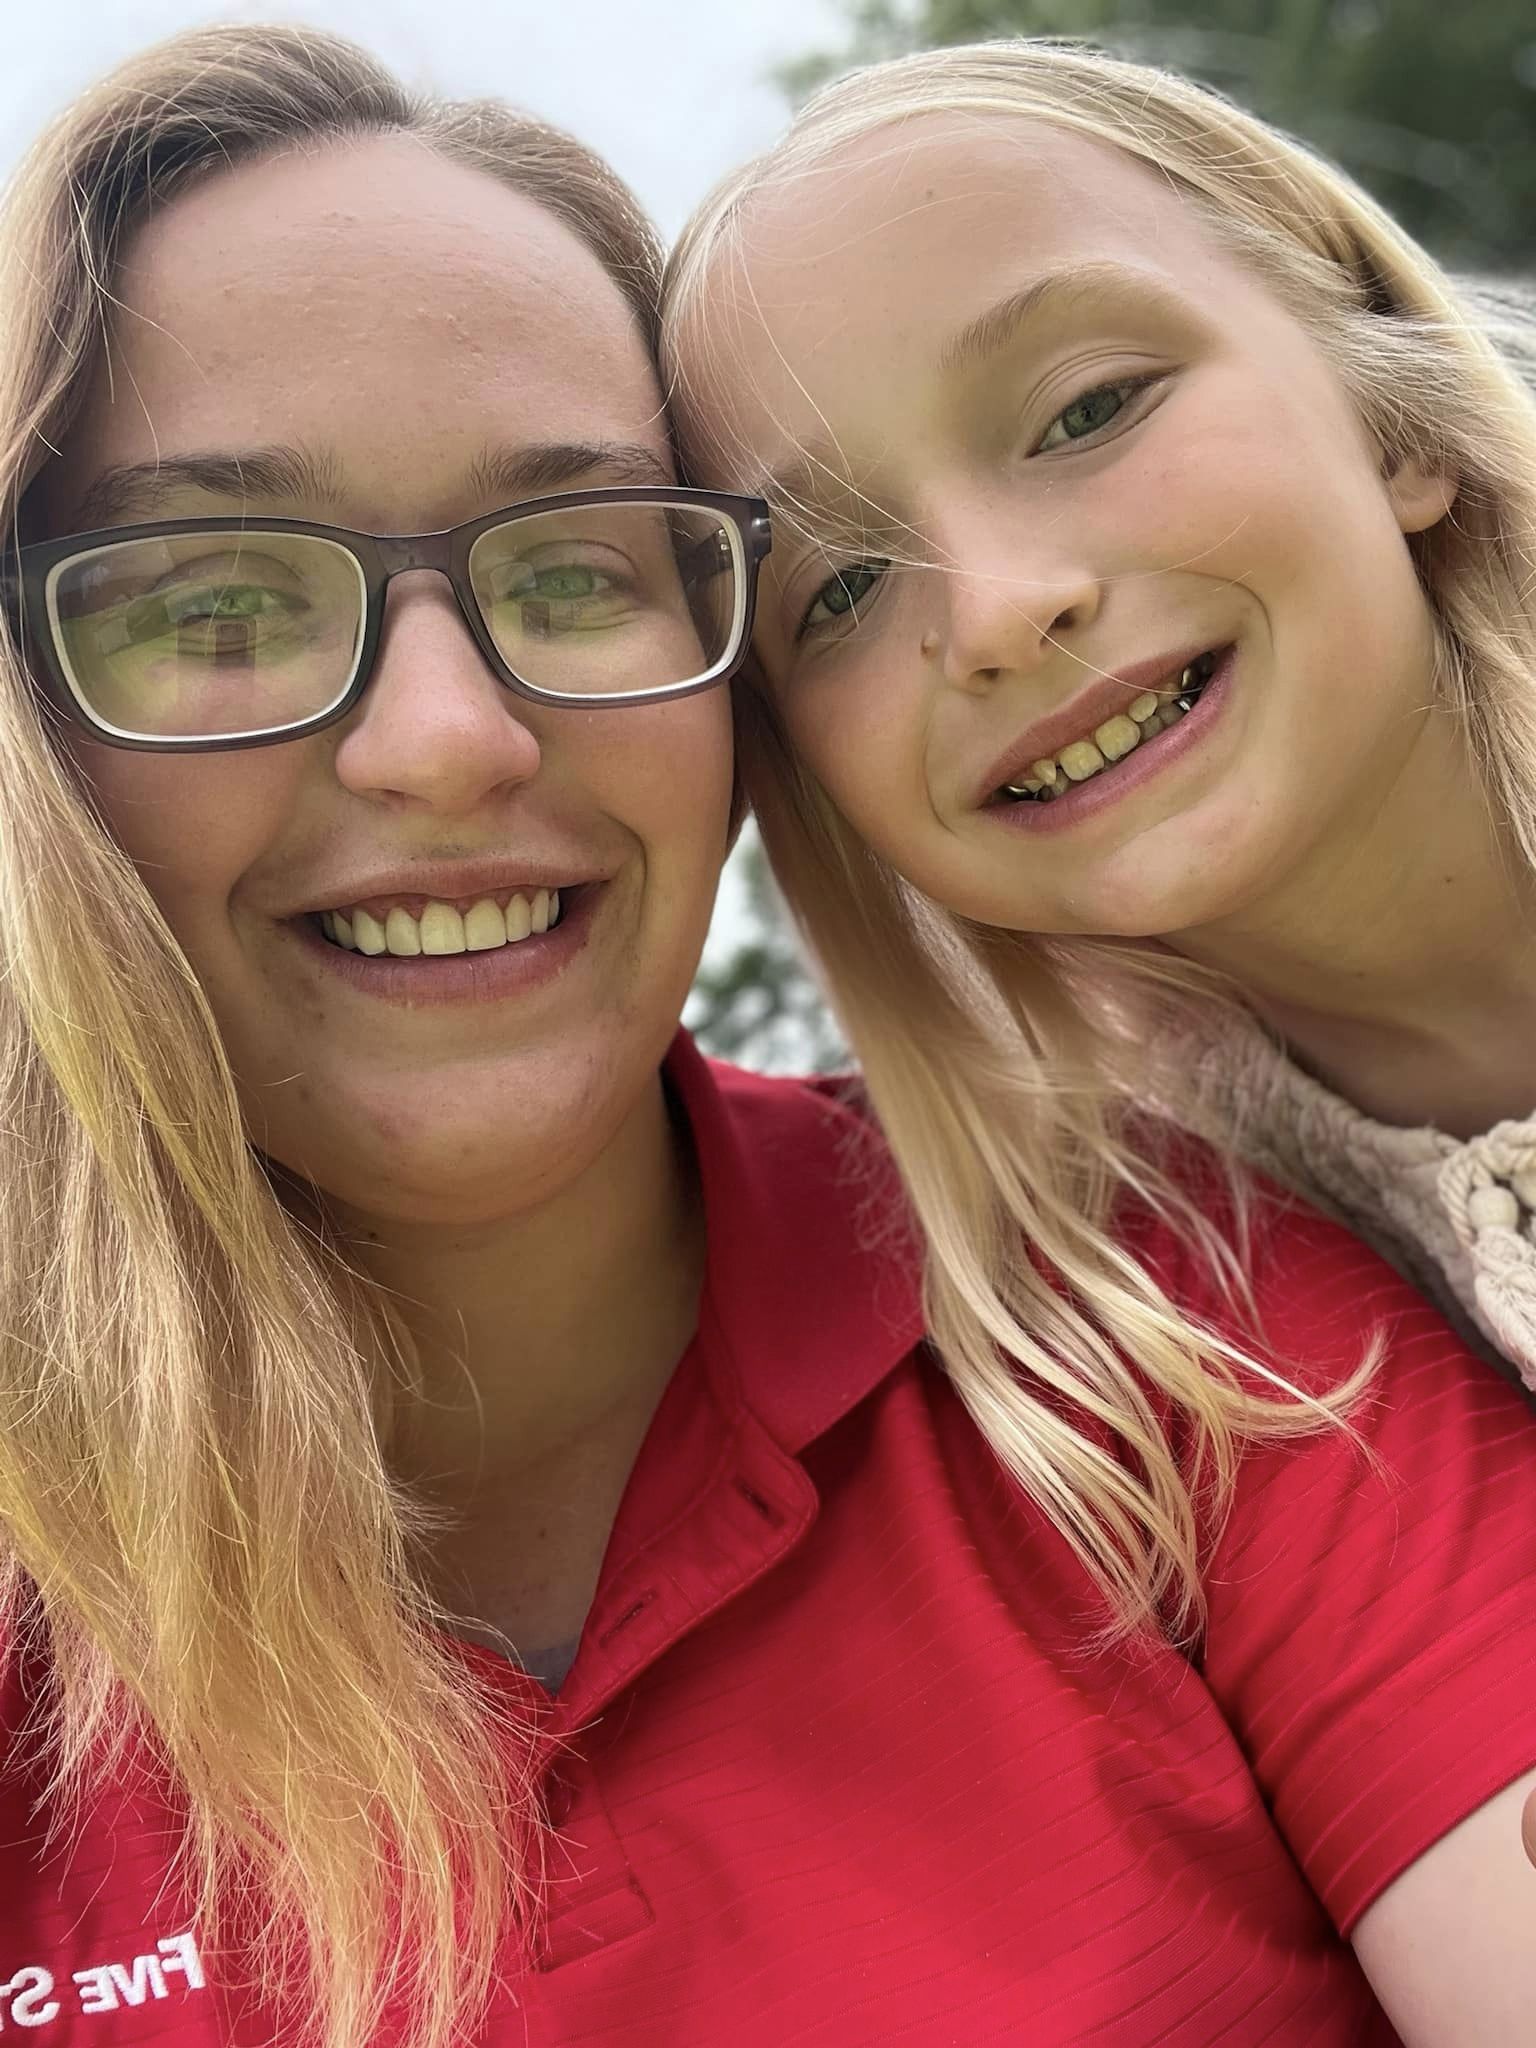 Anna passed away from adrenal cancer at just 29, and it appears she did not have her final wishes for her daughters' care settled before she died